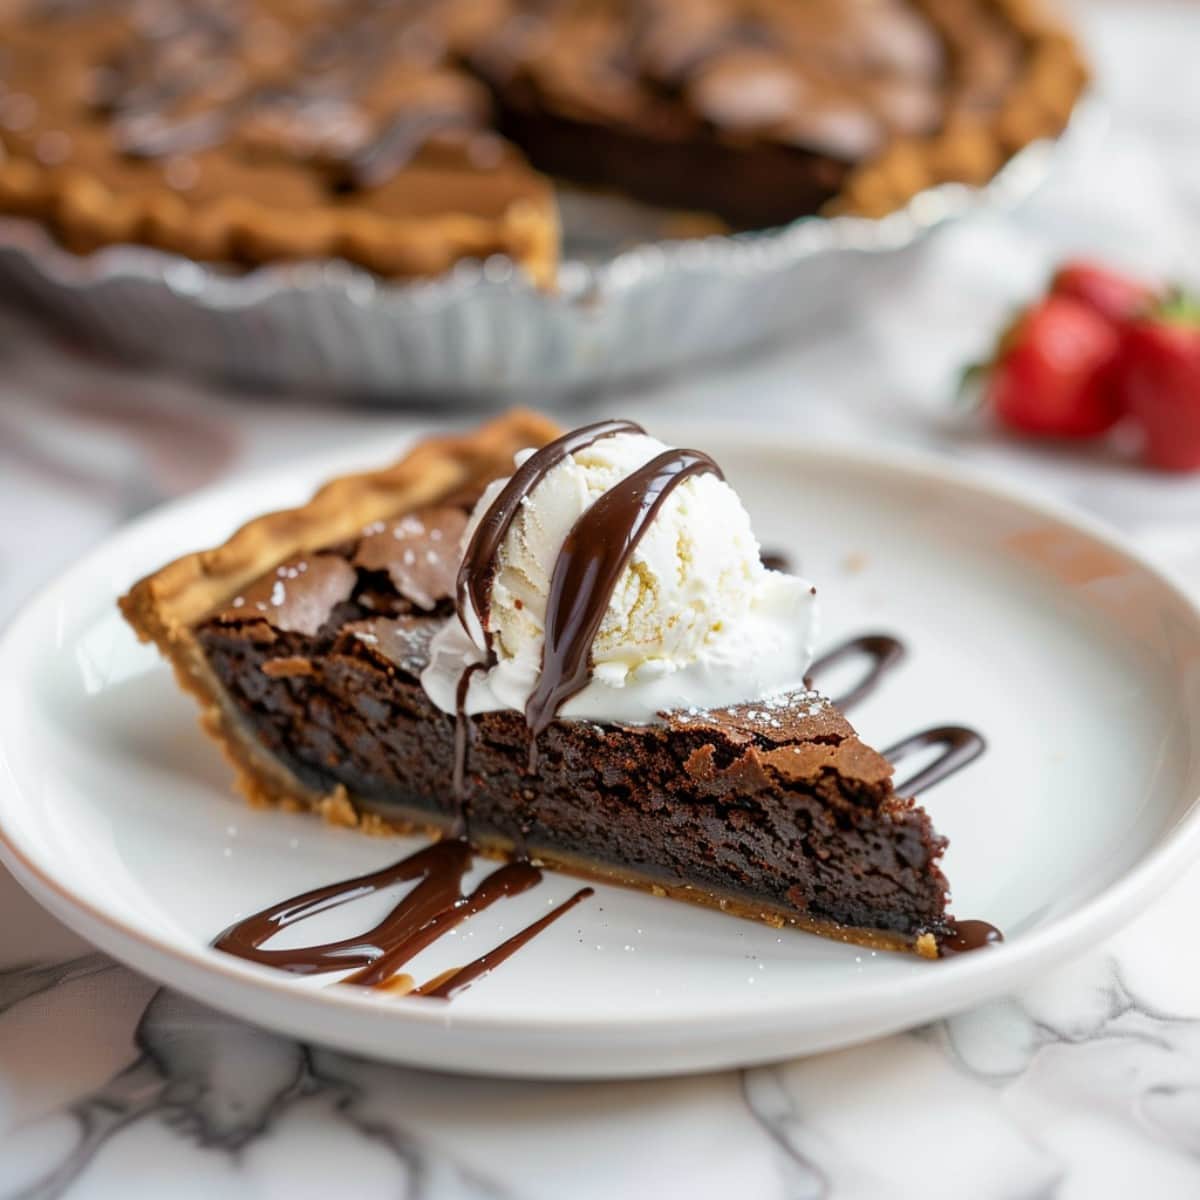 A slice of brownie pie, garnished with swirls of chocolate sauce and topped with a scoop of ice cream